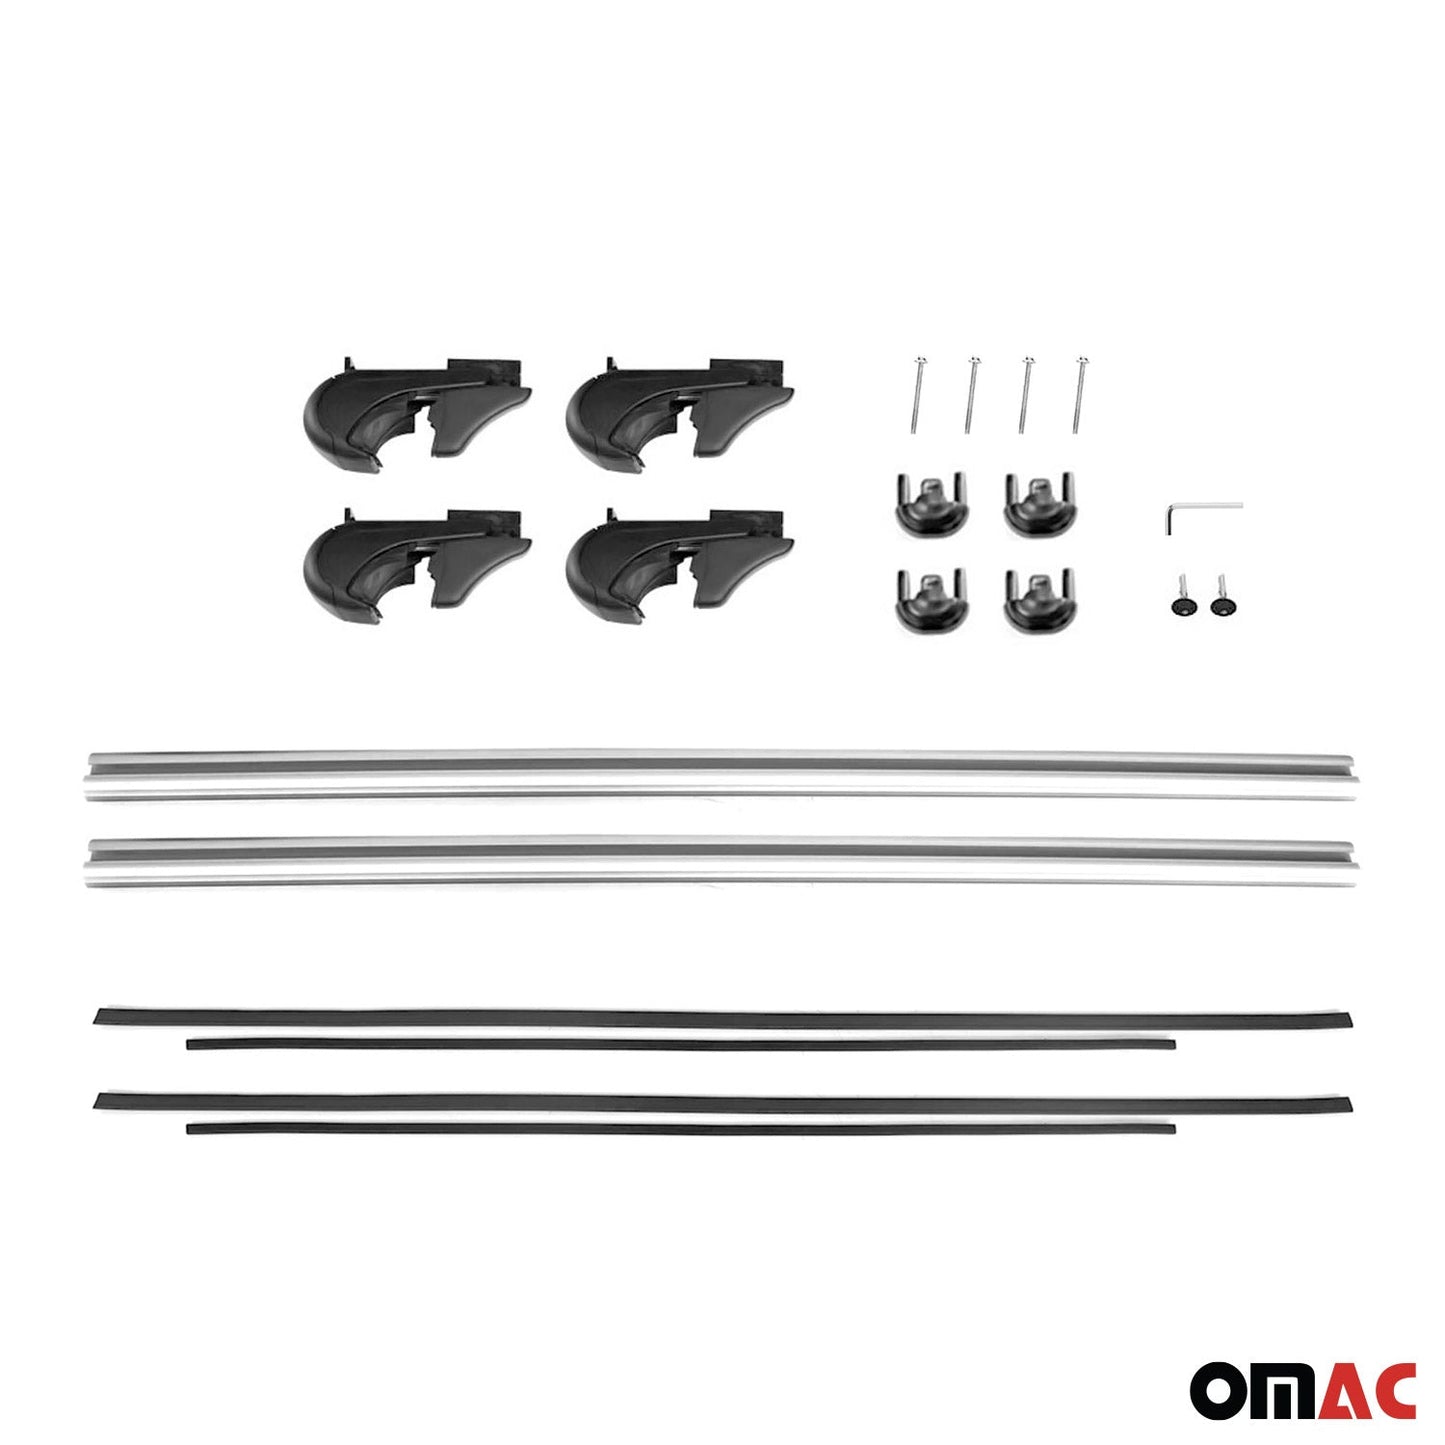 OMAC Roof Rack Cross Bars Luggage Carrier Black Set for BMW X3 2003-2010 12079696929LB